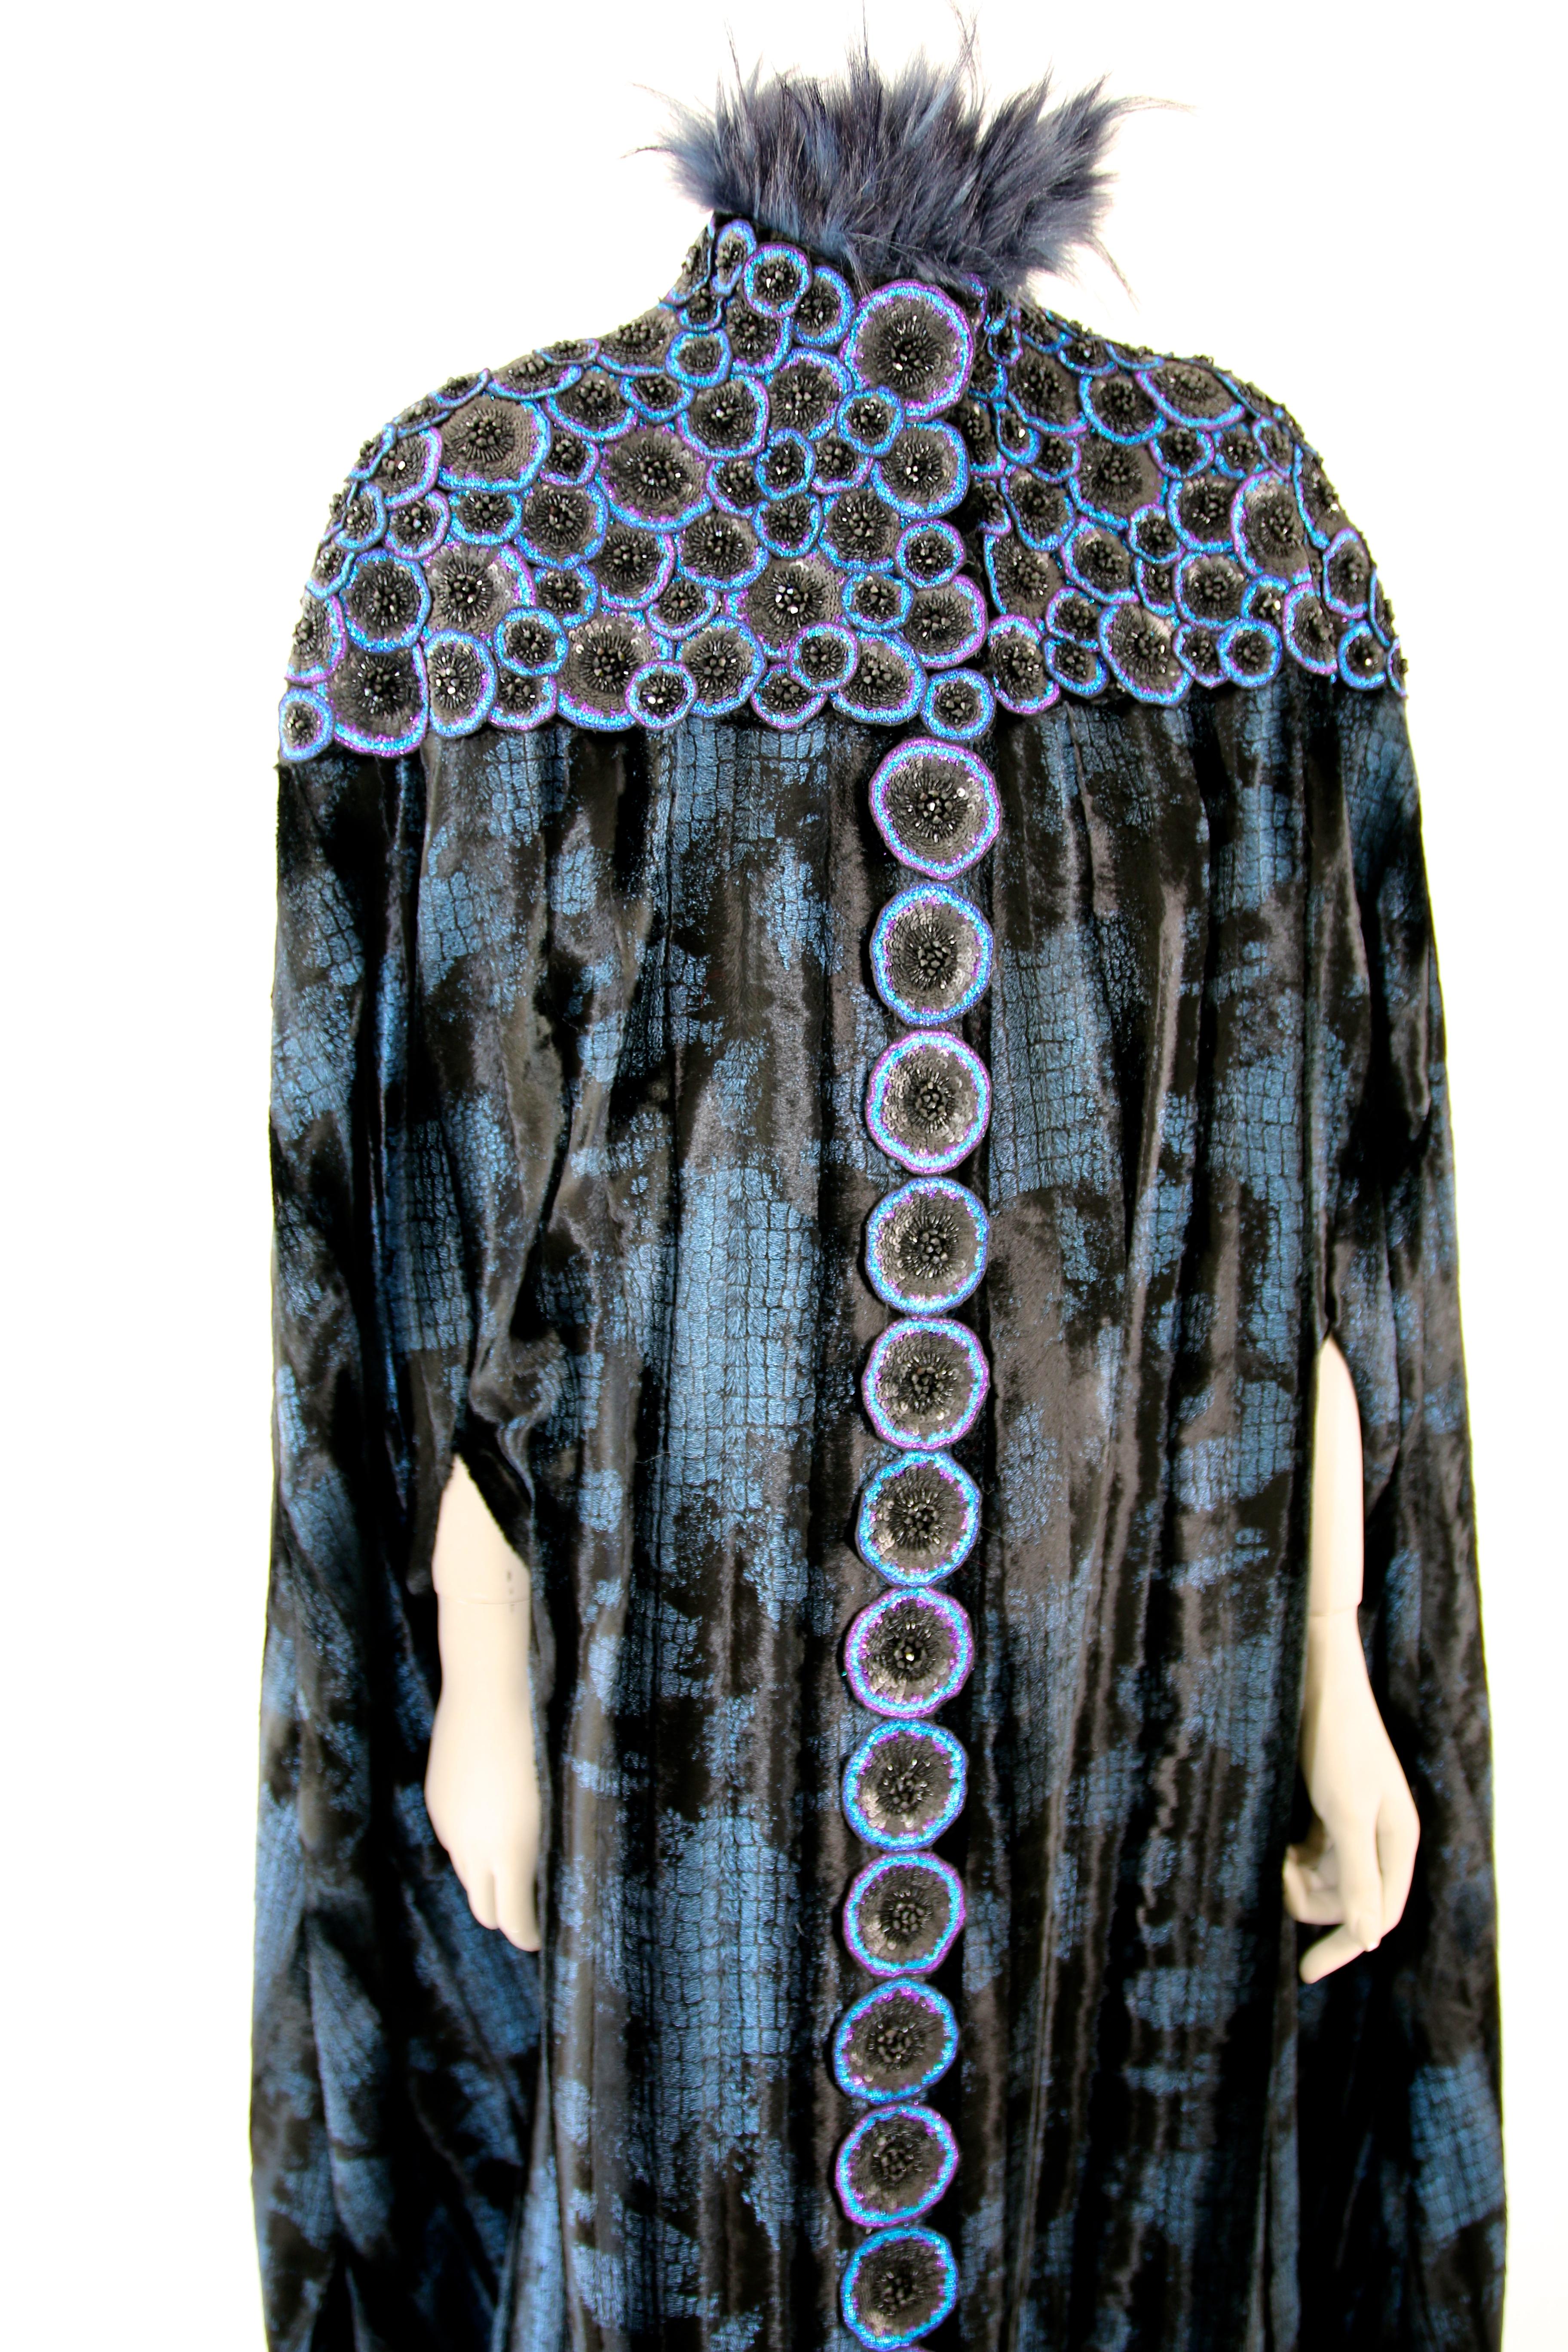 Pelush Black and Blue Faux Fur Couture Opera Coat Cape with Embroidery - Small For Sale 7